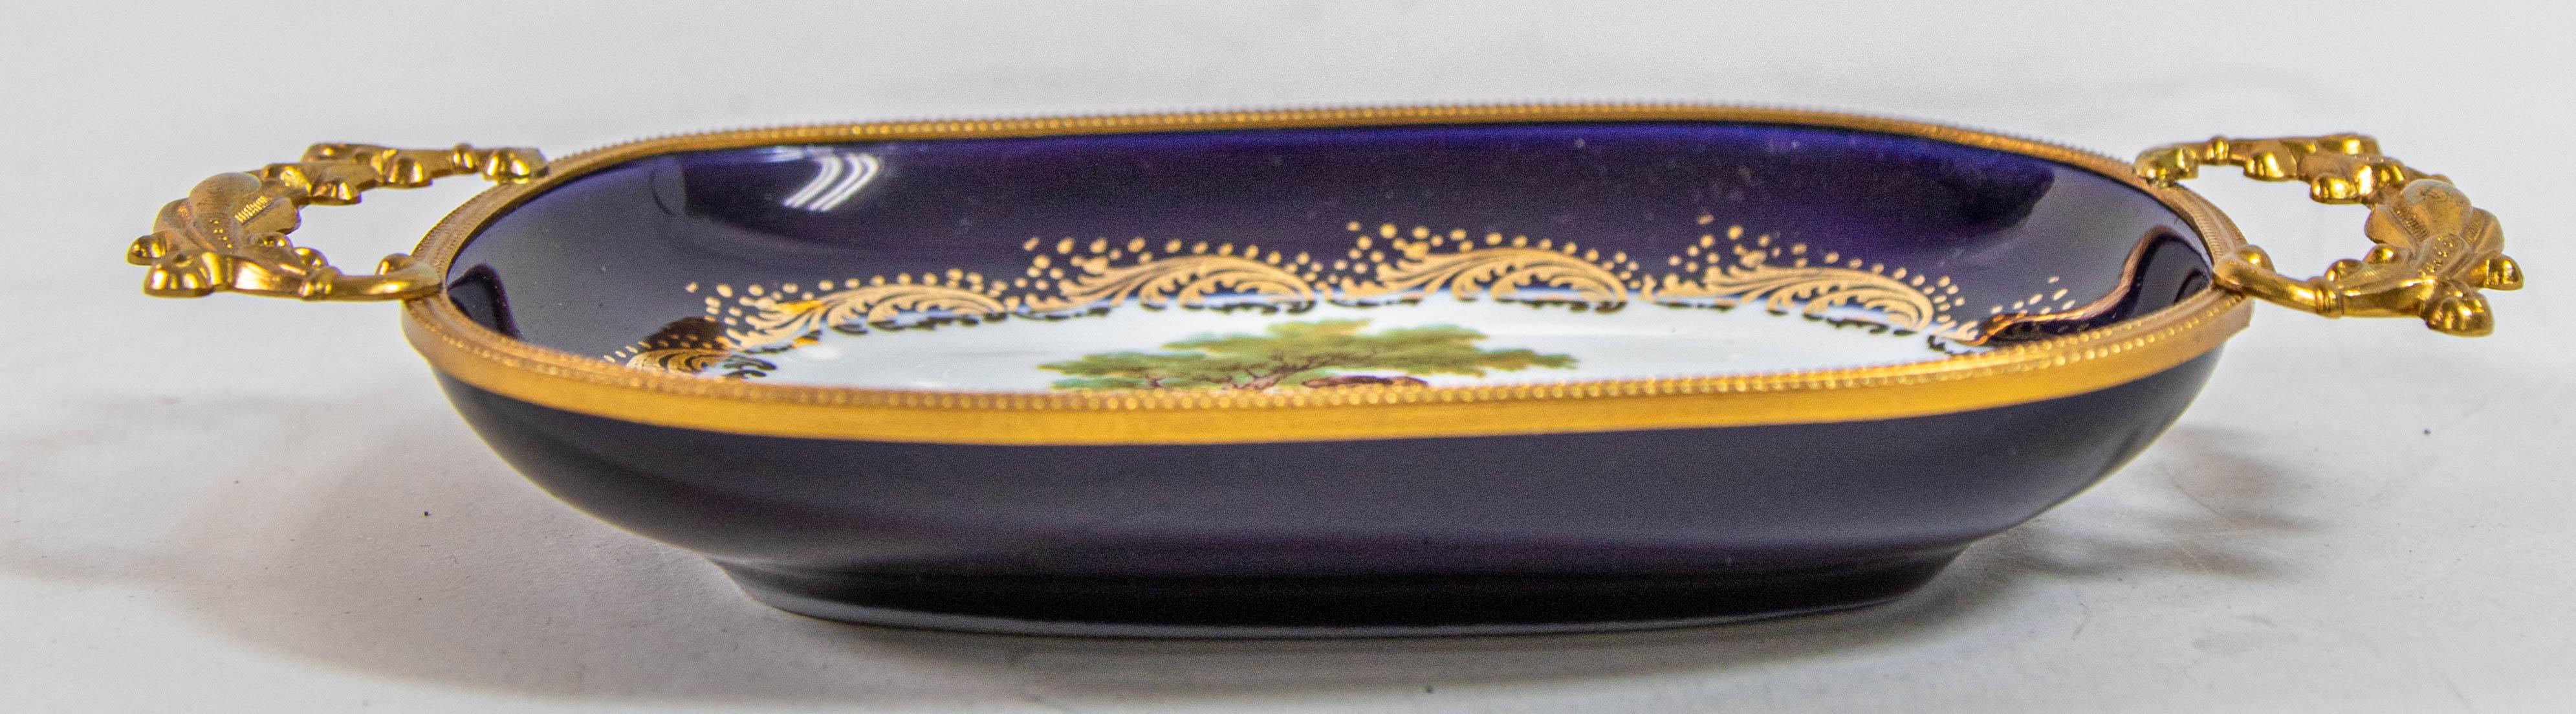 French Limoges France Dish in Royal Blue with Fragonard Couple and Fine Gold Metal Trim For Sale